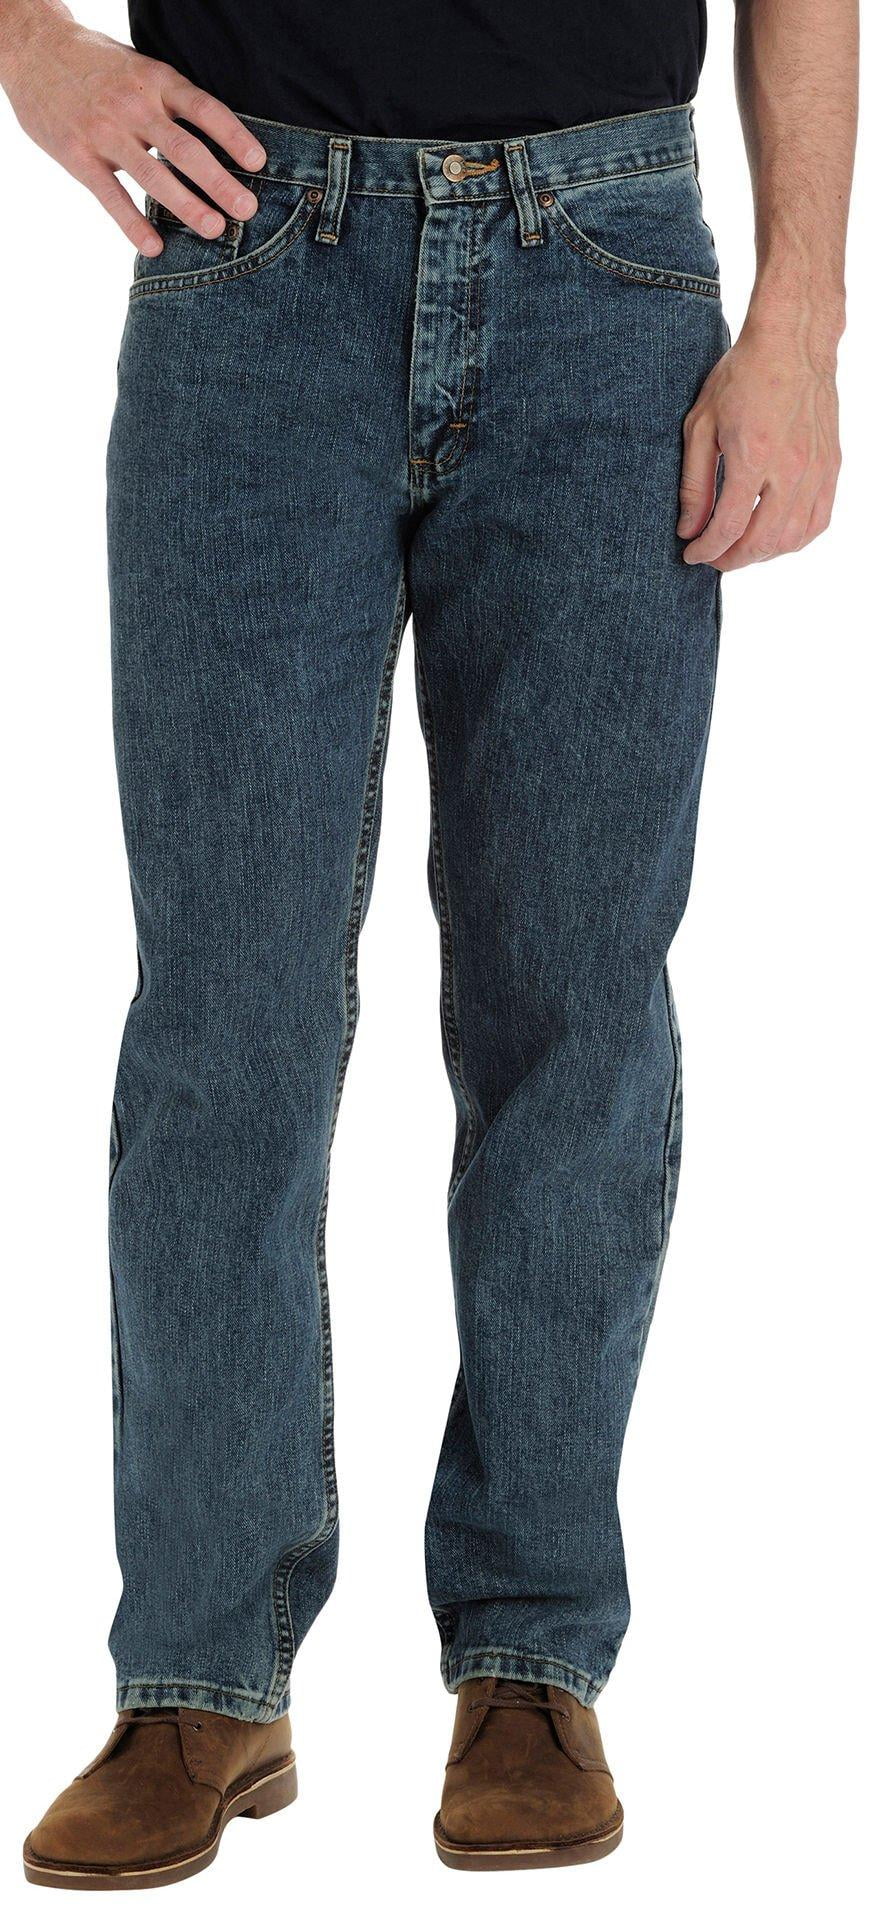 Lee Men's Relaxed Fit Jeans